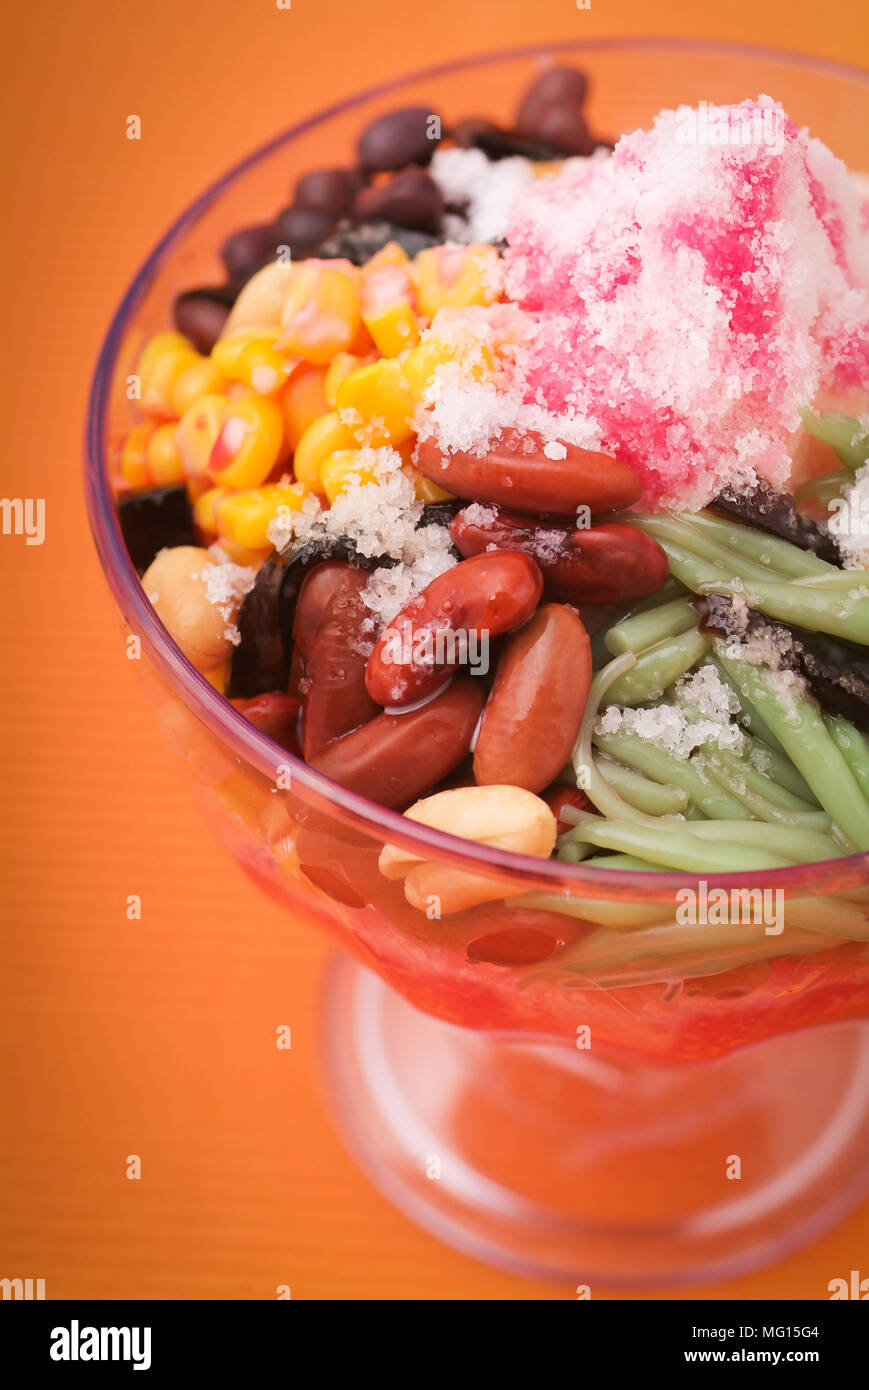 ice kacang, asian dessert of shaved ice with icecream Stock Photo